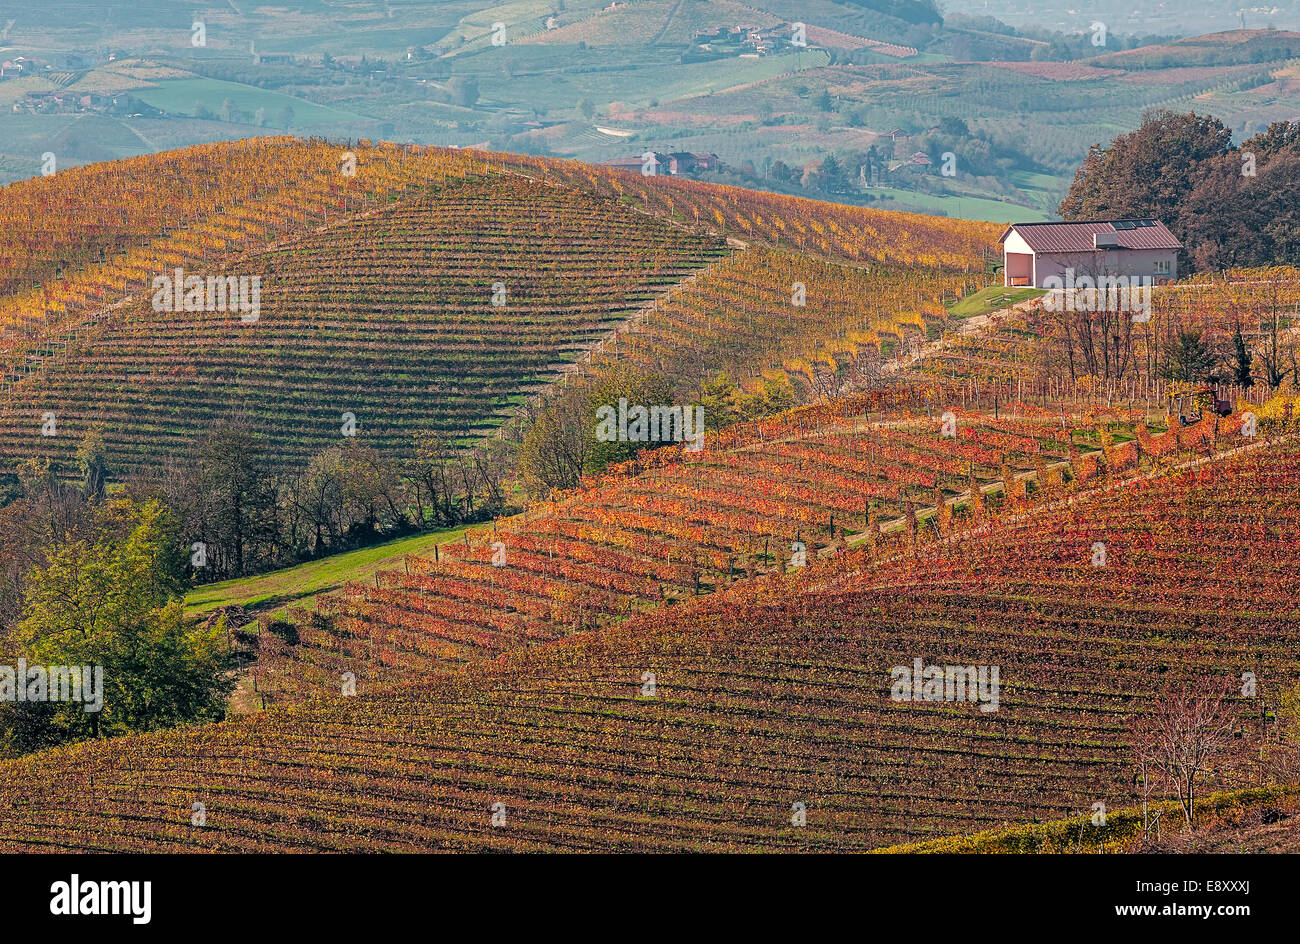 Red, orange and yellow vineyards on the hills of Piedmont, Northern Italy. Stock Photo